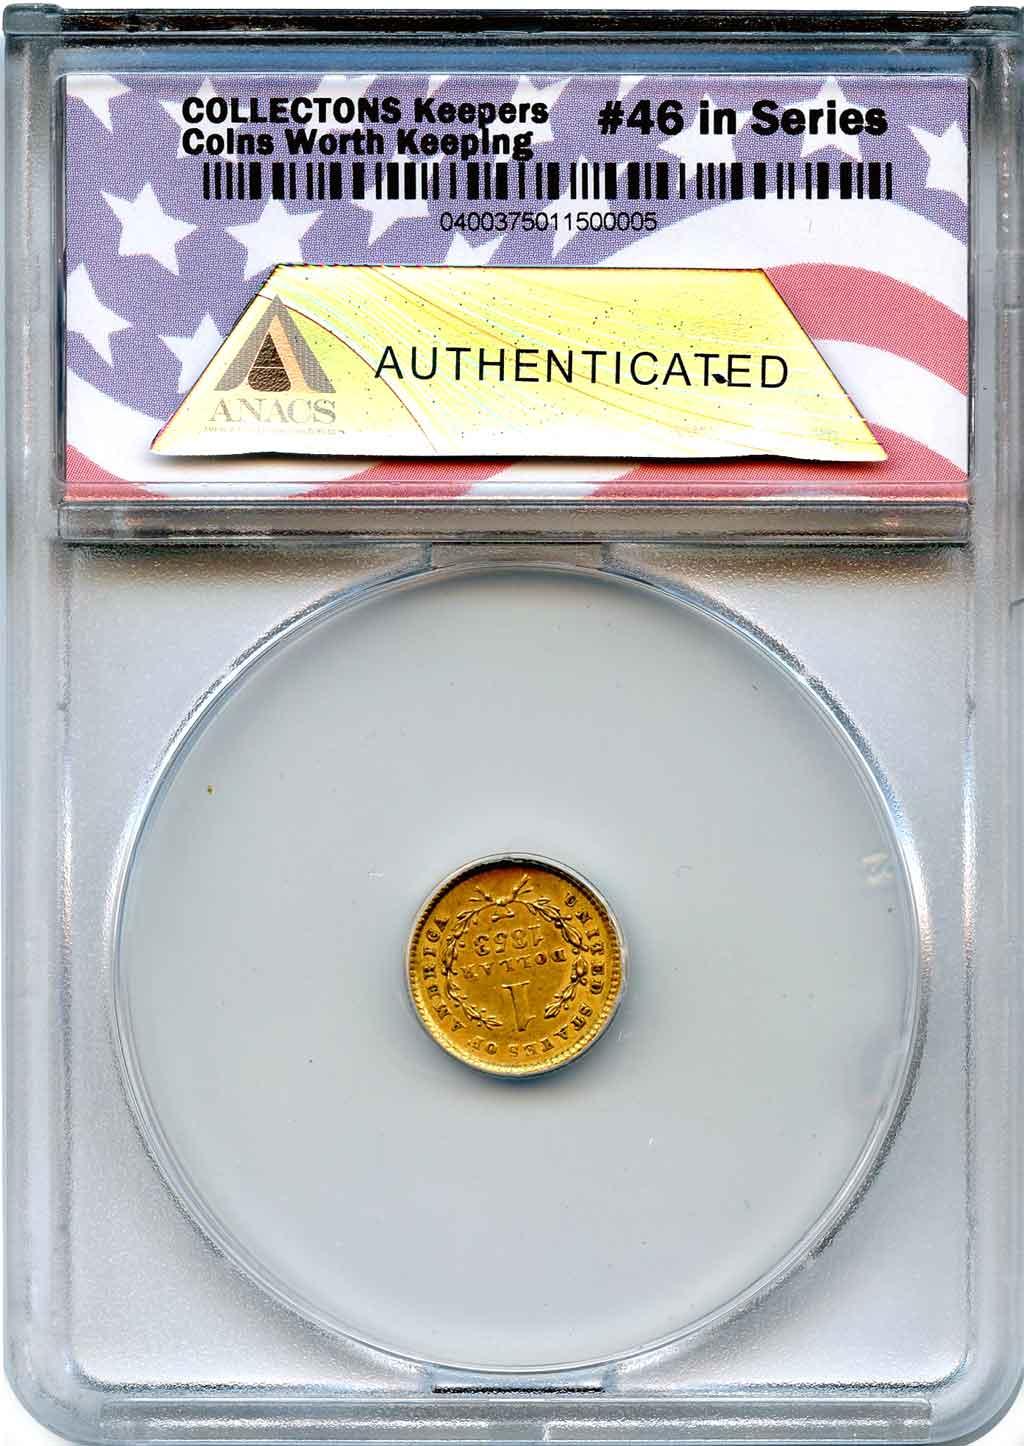 CollecTons Keepers #46: 1853 Type 1 Liberty Head Gold Dollar Certified in Exclusive ANACS Holder